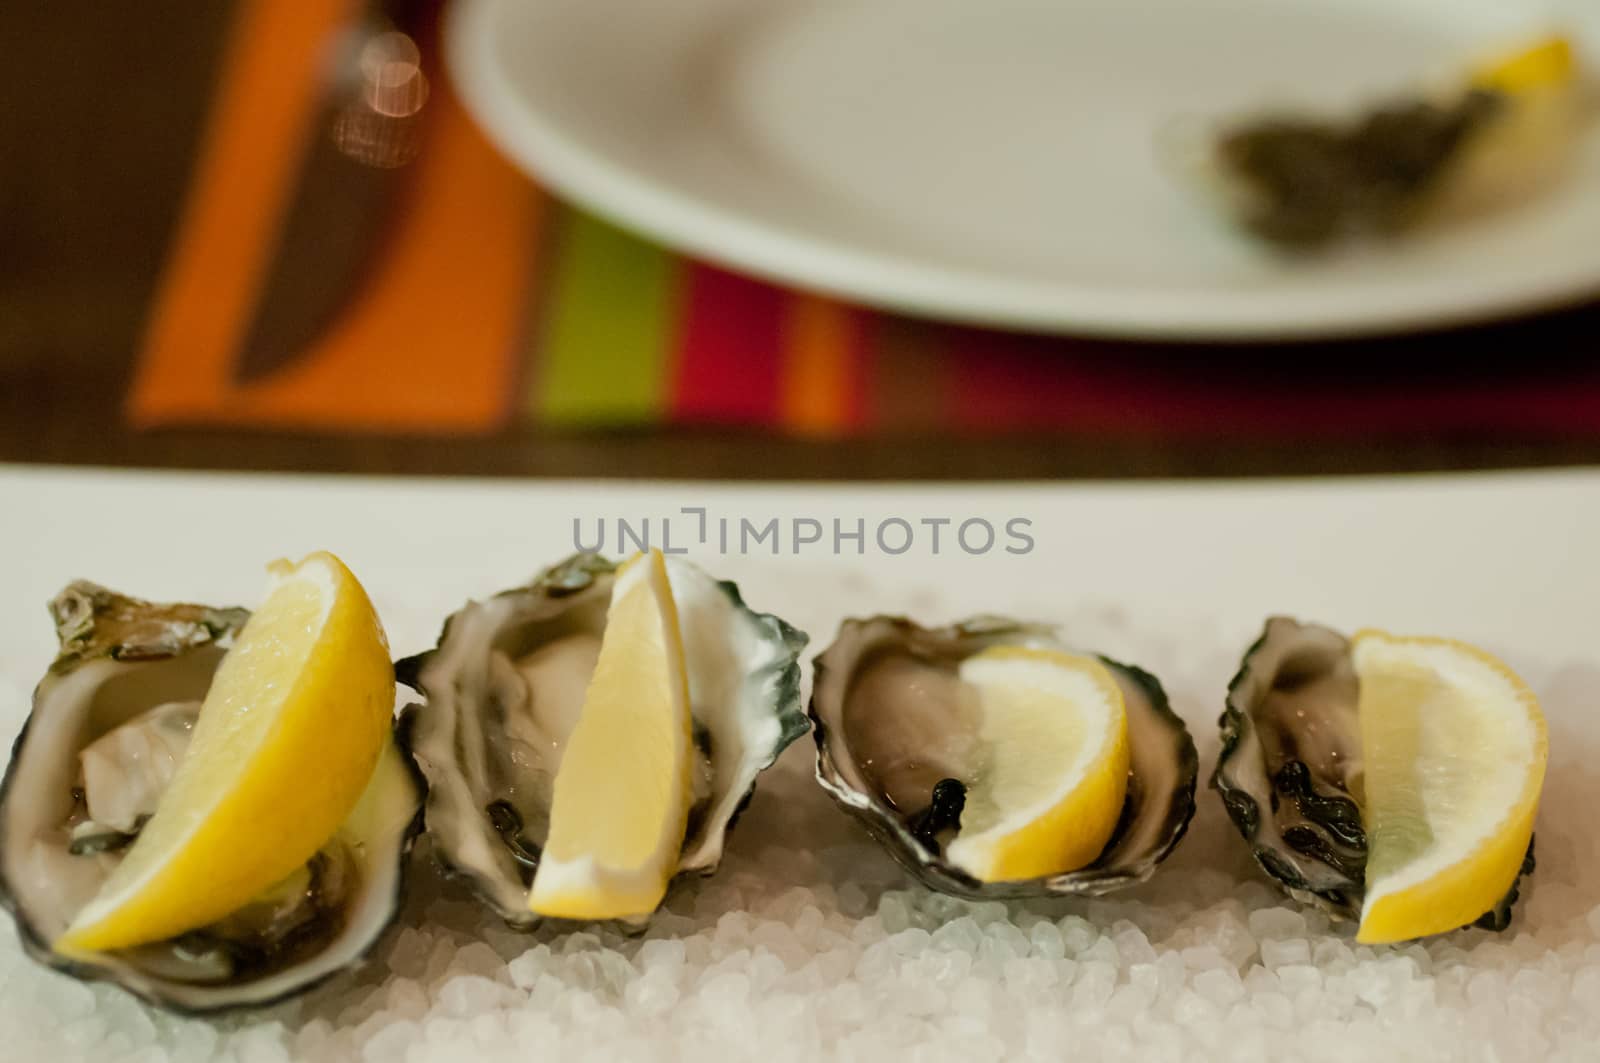 Fresh pacific oysters with lemon on salt plate by eyeofpaul